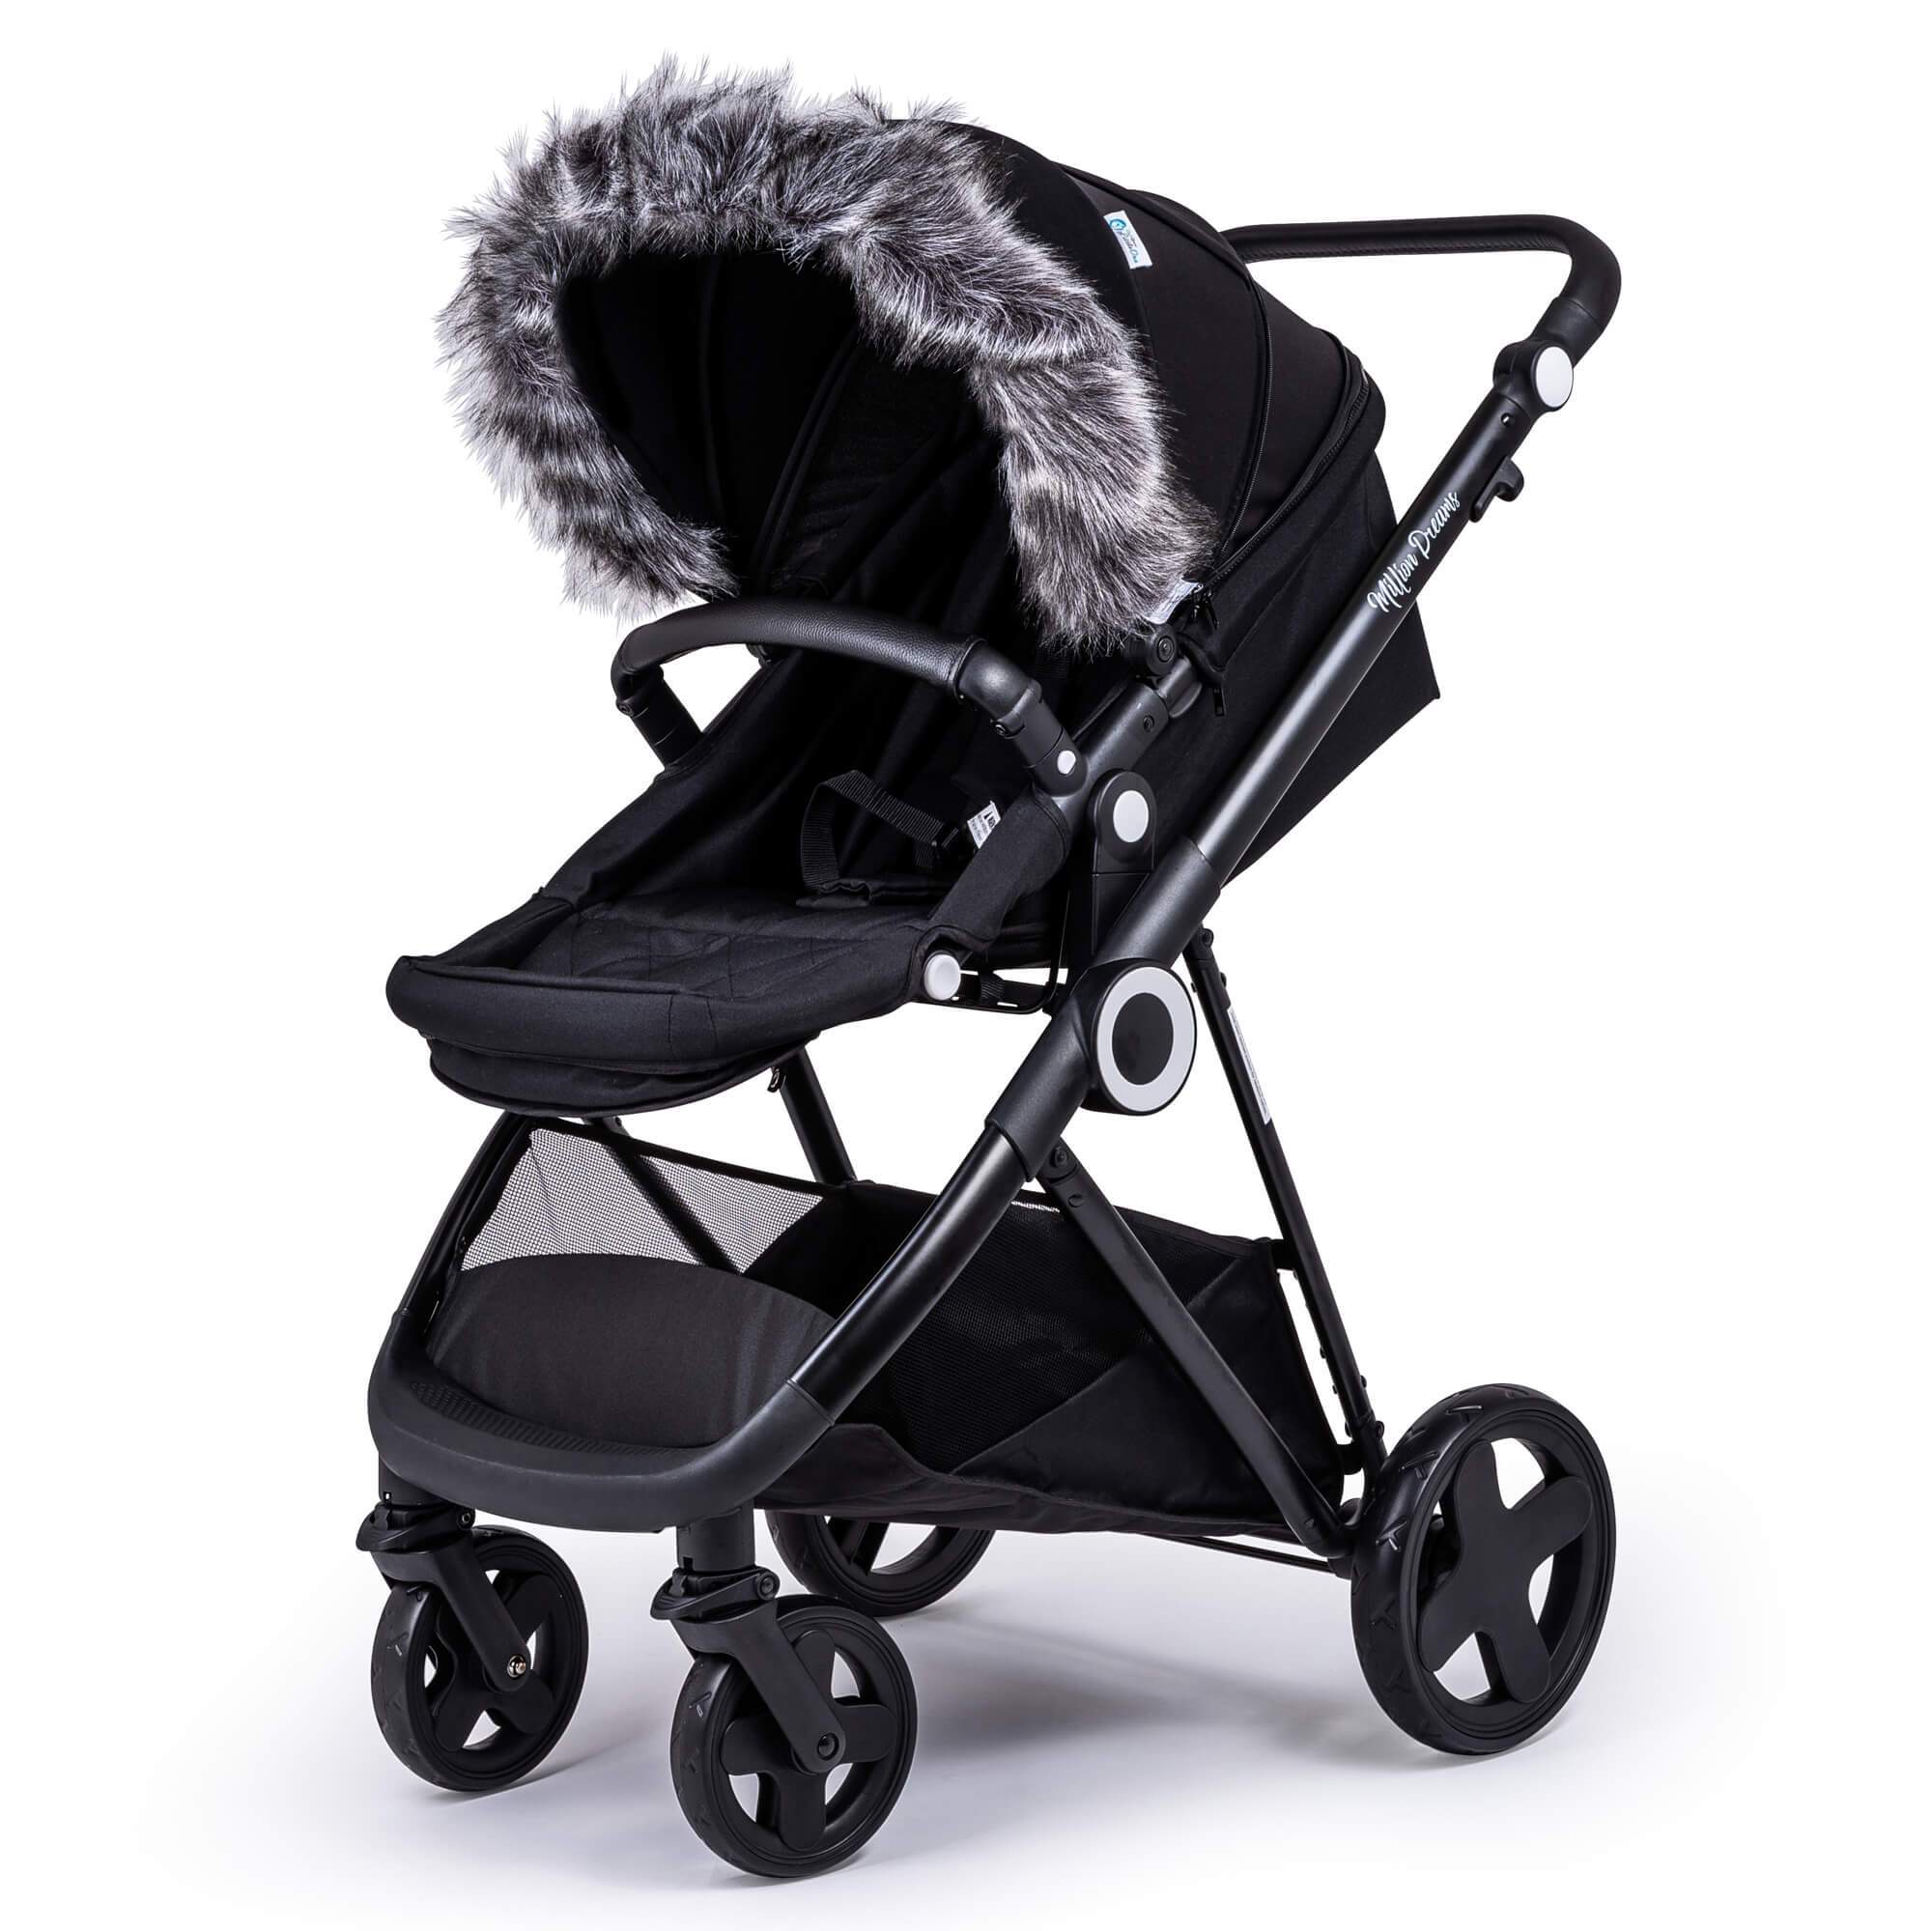 Pram Fur Hood Trim Attachment for Pushchair Compatible with Bloom - Dark Grey / Fits All Models | For Your Little One